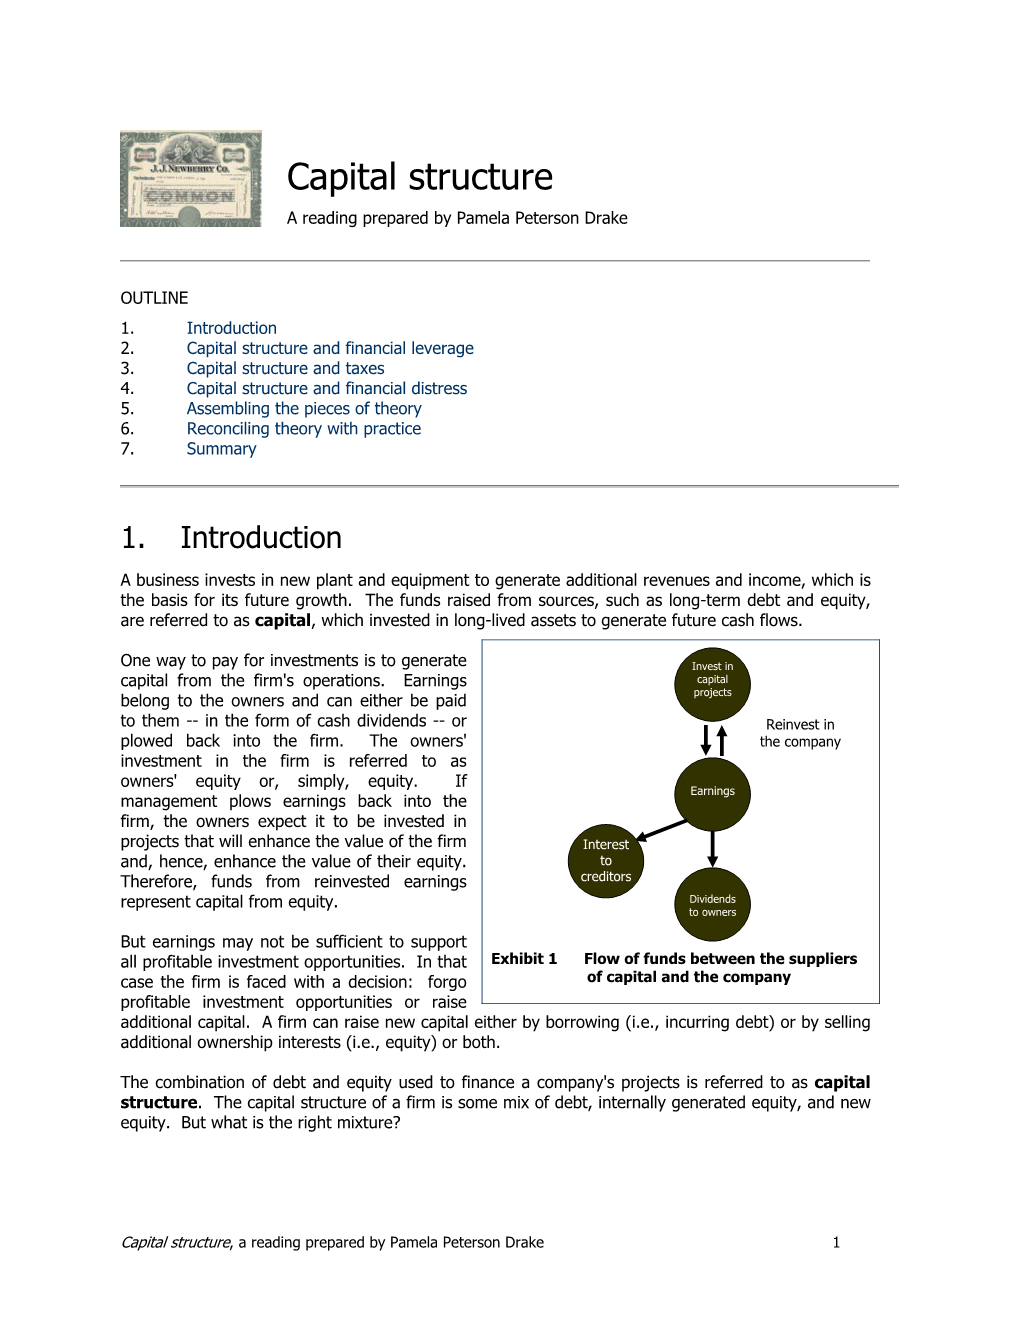 Capital Structure a Reading Prepared by Pamela Peterson Drake